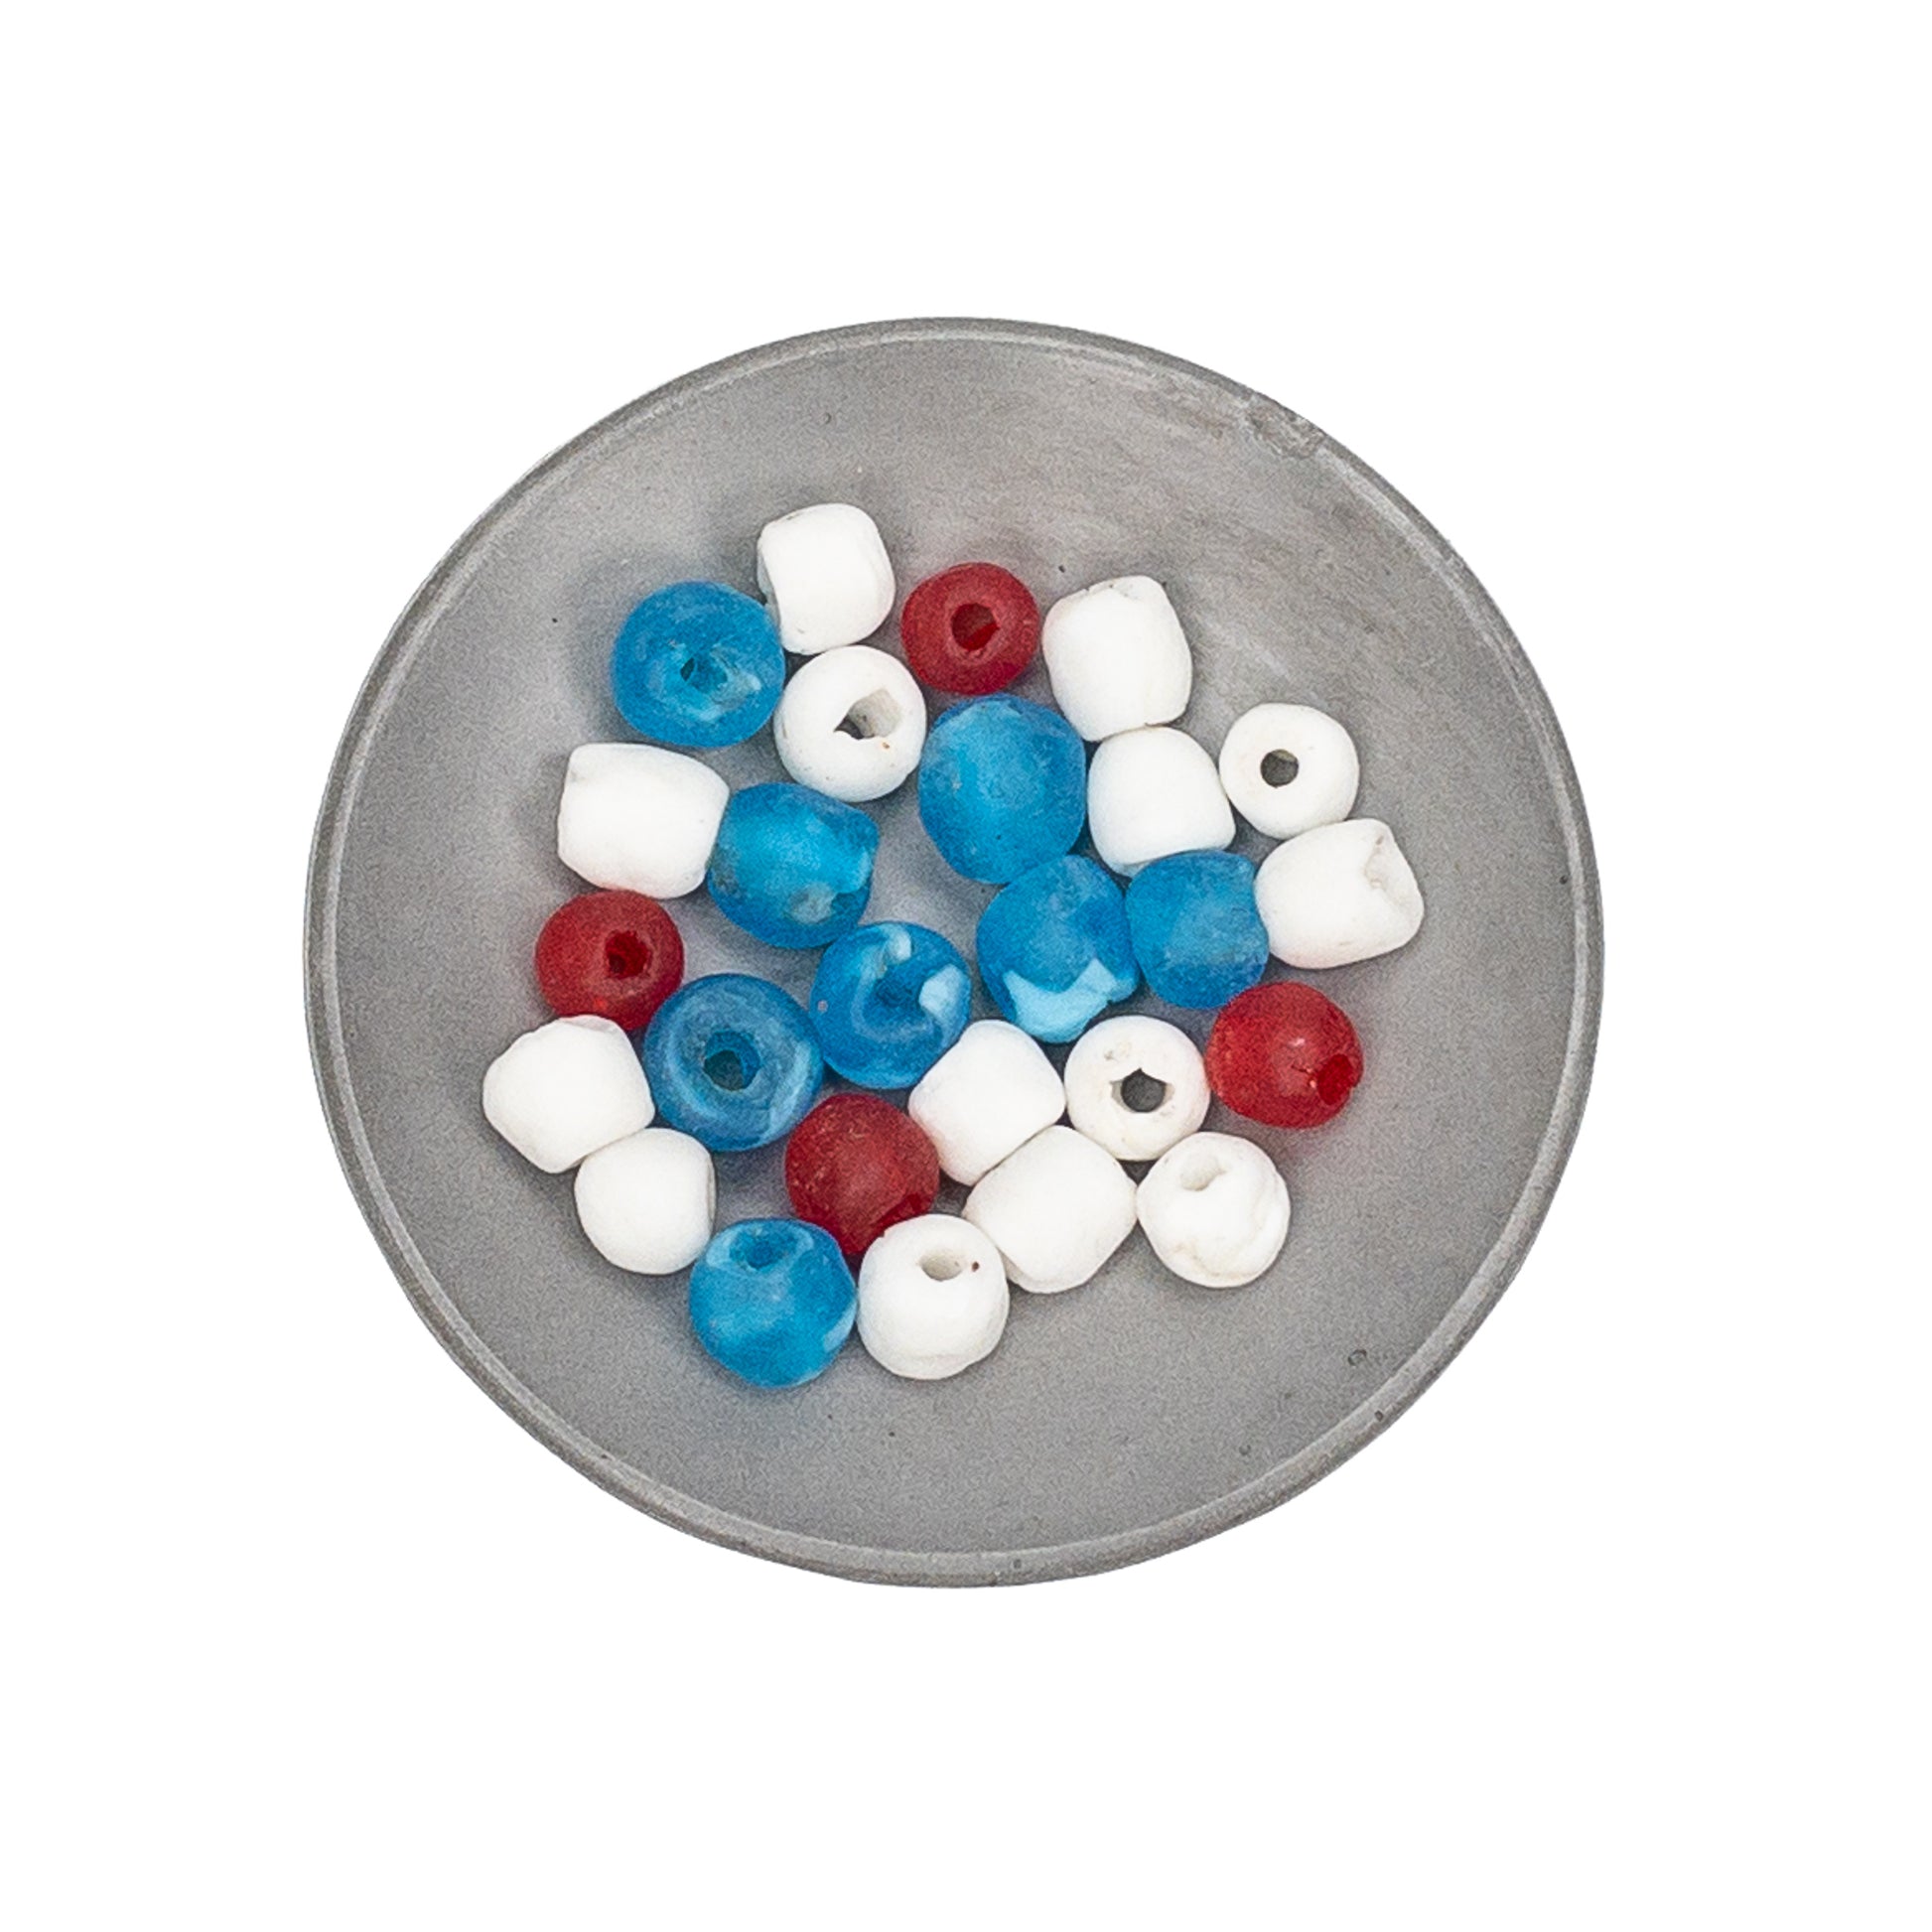 Liberty Rustic African Recycled Glass Bead Mix - 26 pcs.